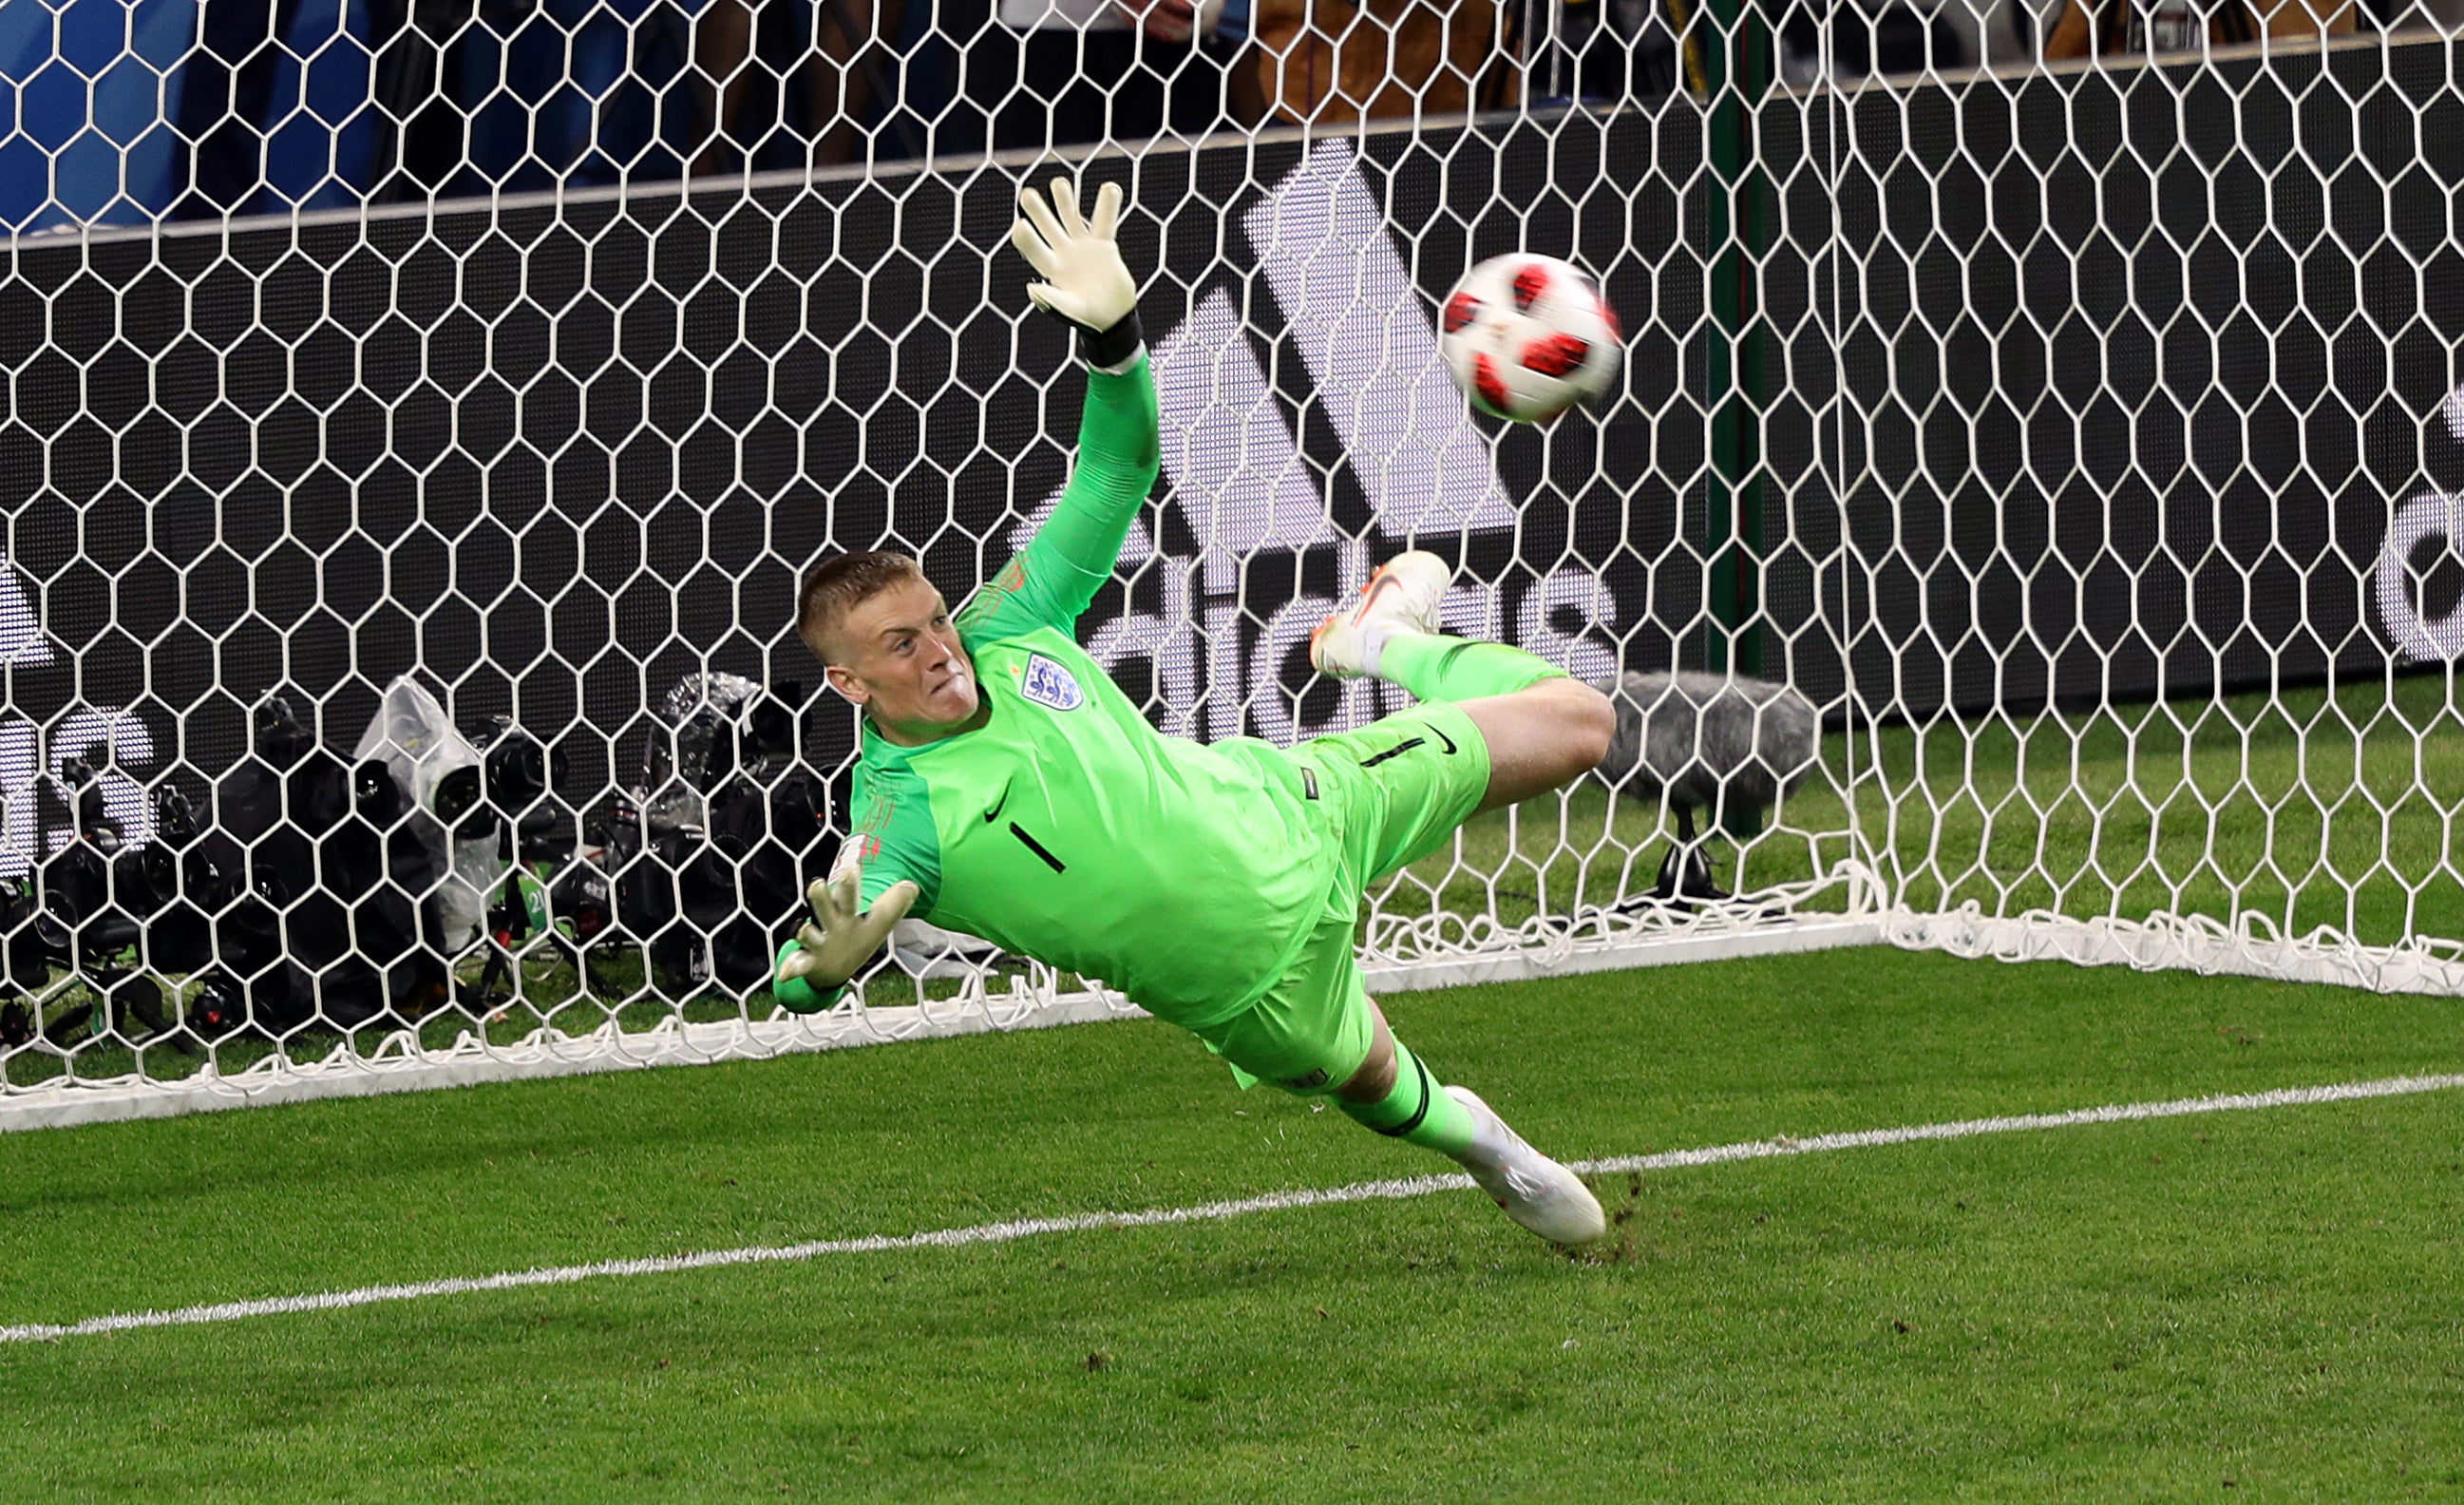 England goalkeeper Jordan Pickford saves a penalty from Colombia’s Carlos Bacca during the FIFA World Cup 2018, round of 16 shoot-out. (Aaron Chown/PA)